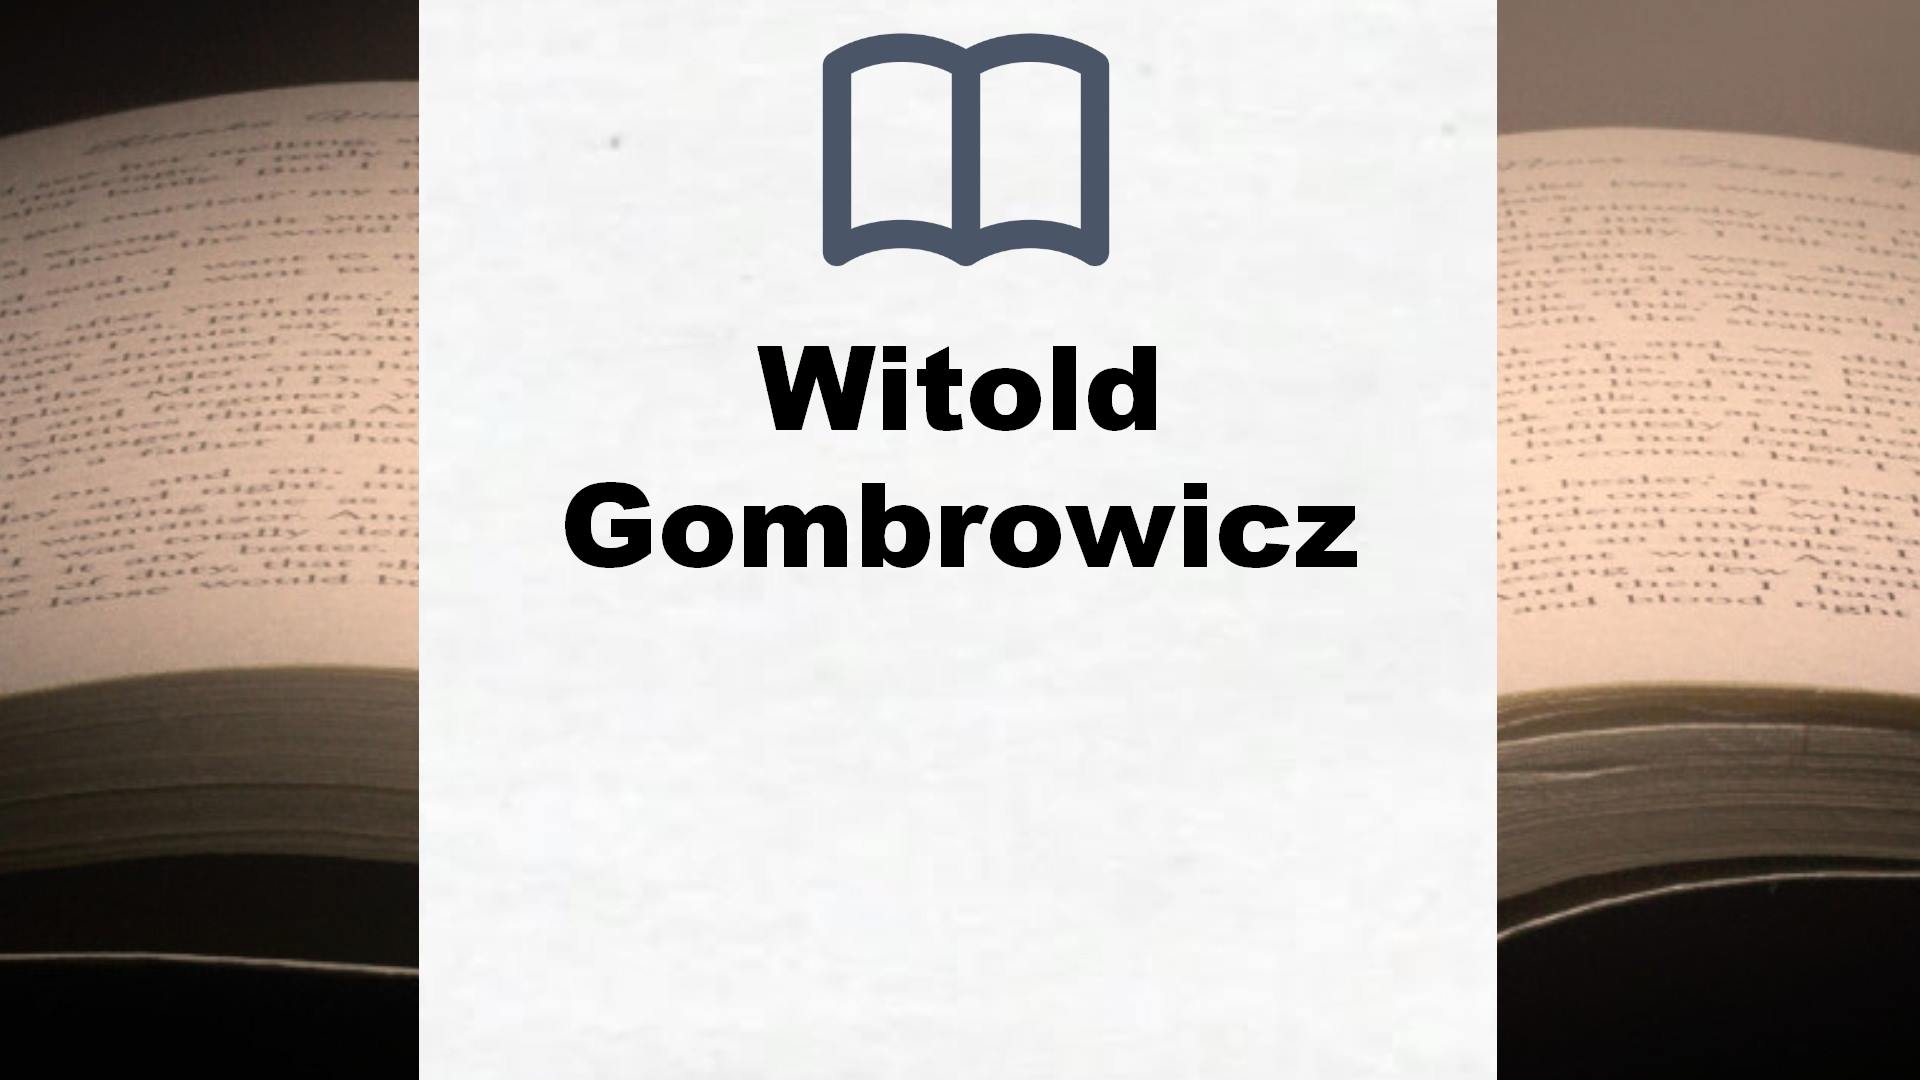 Libros Witold Gombrowicz